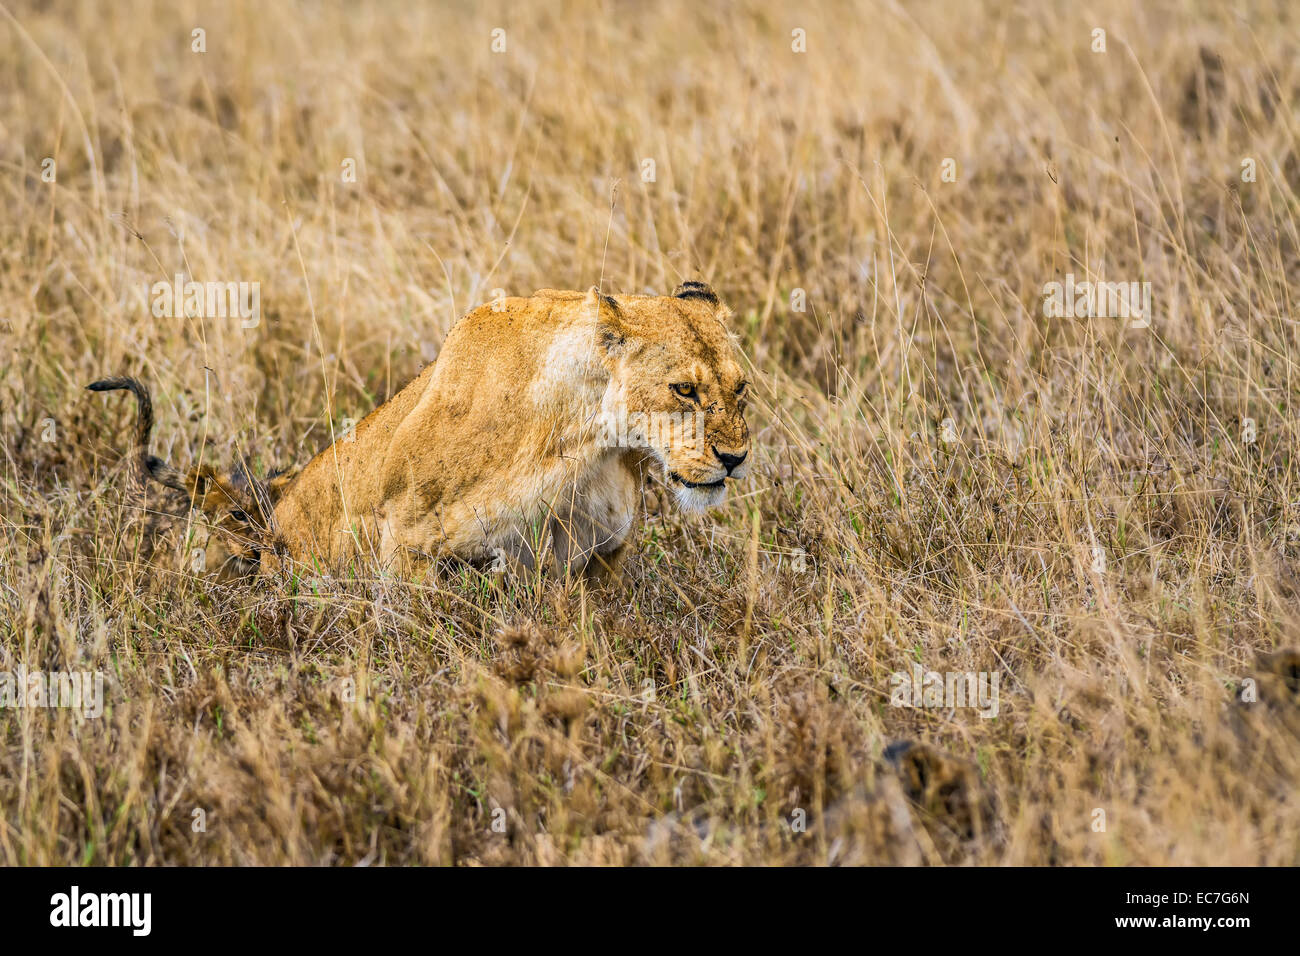 Lioness with a cub in the Ngorongoro Crater, Tanzania Stock Photo